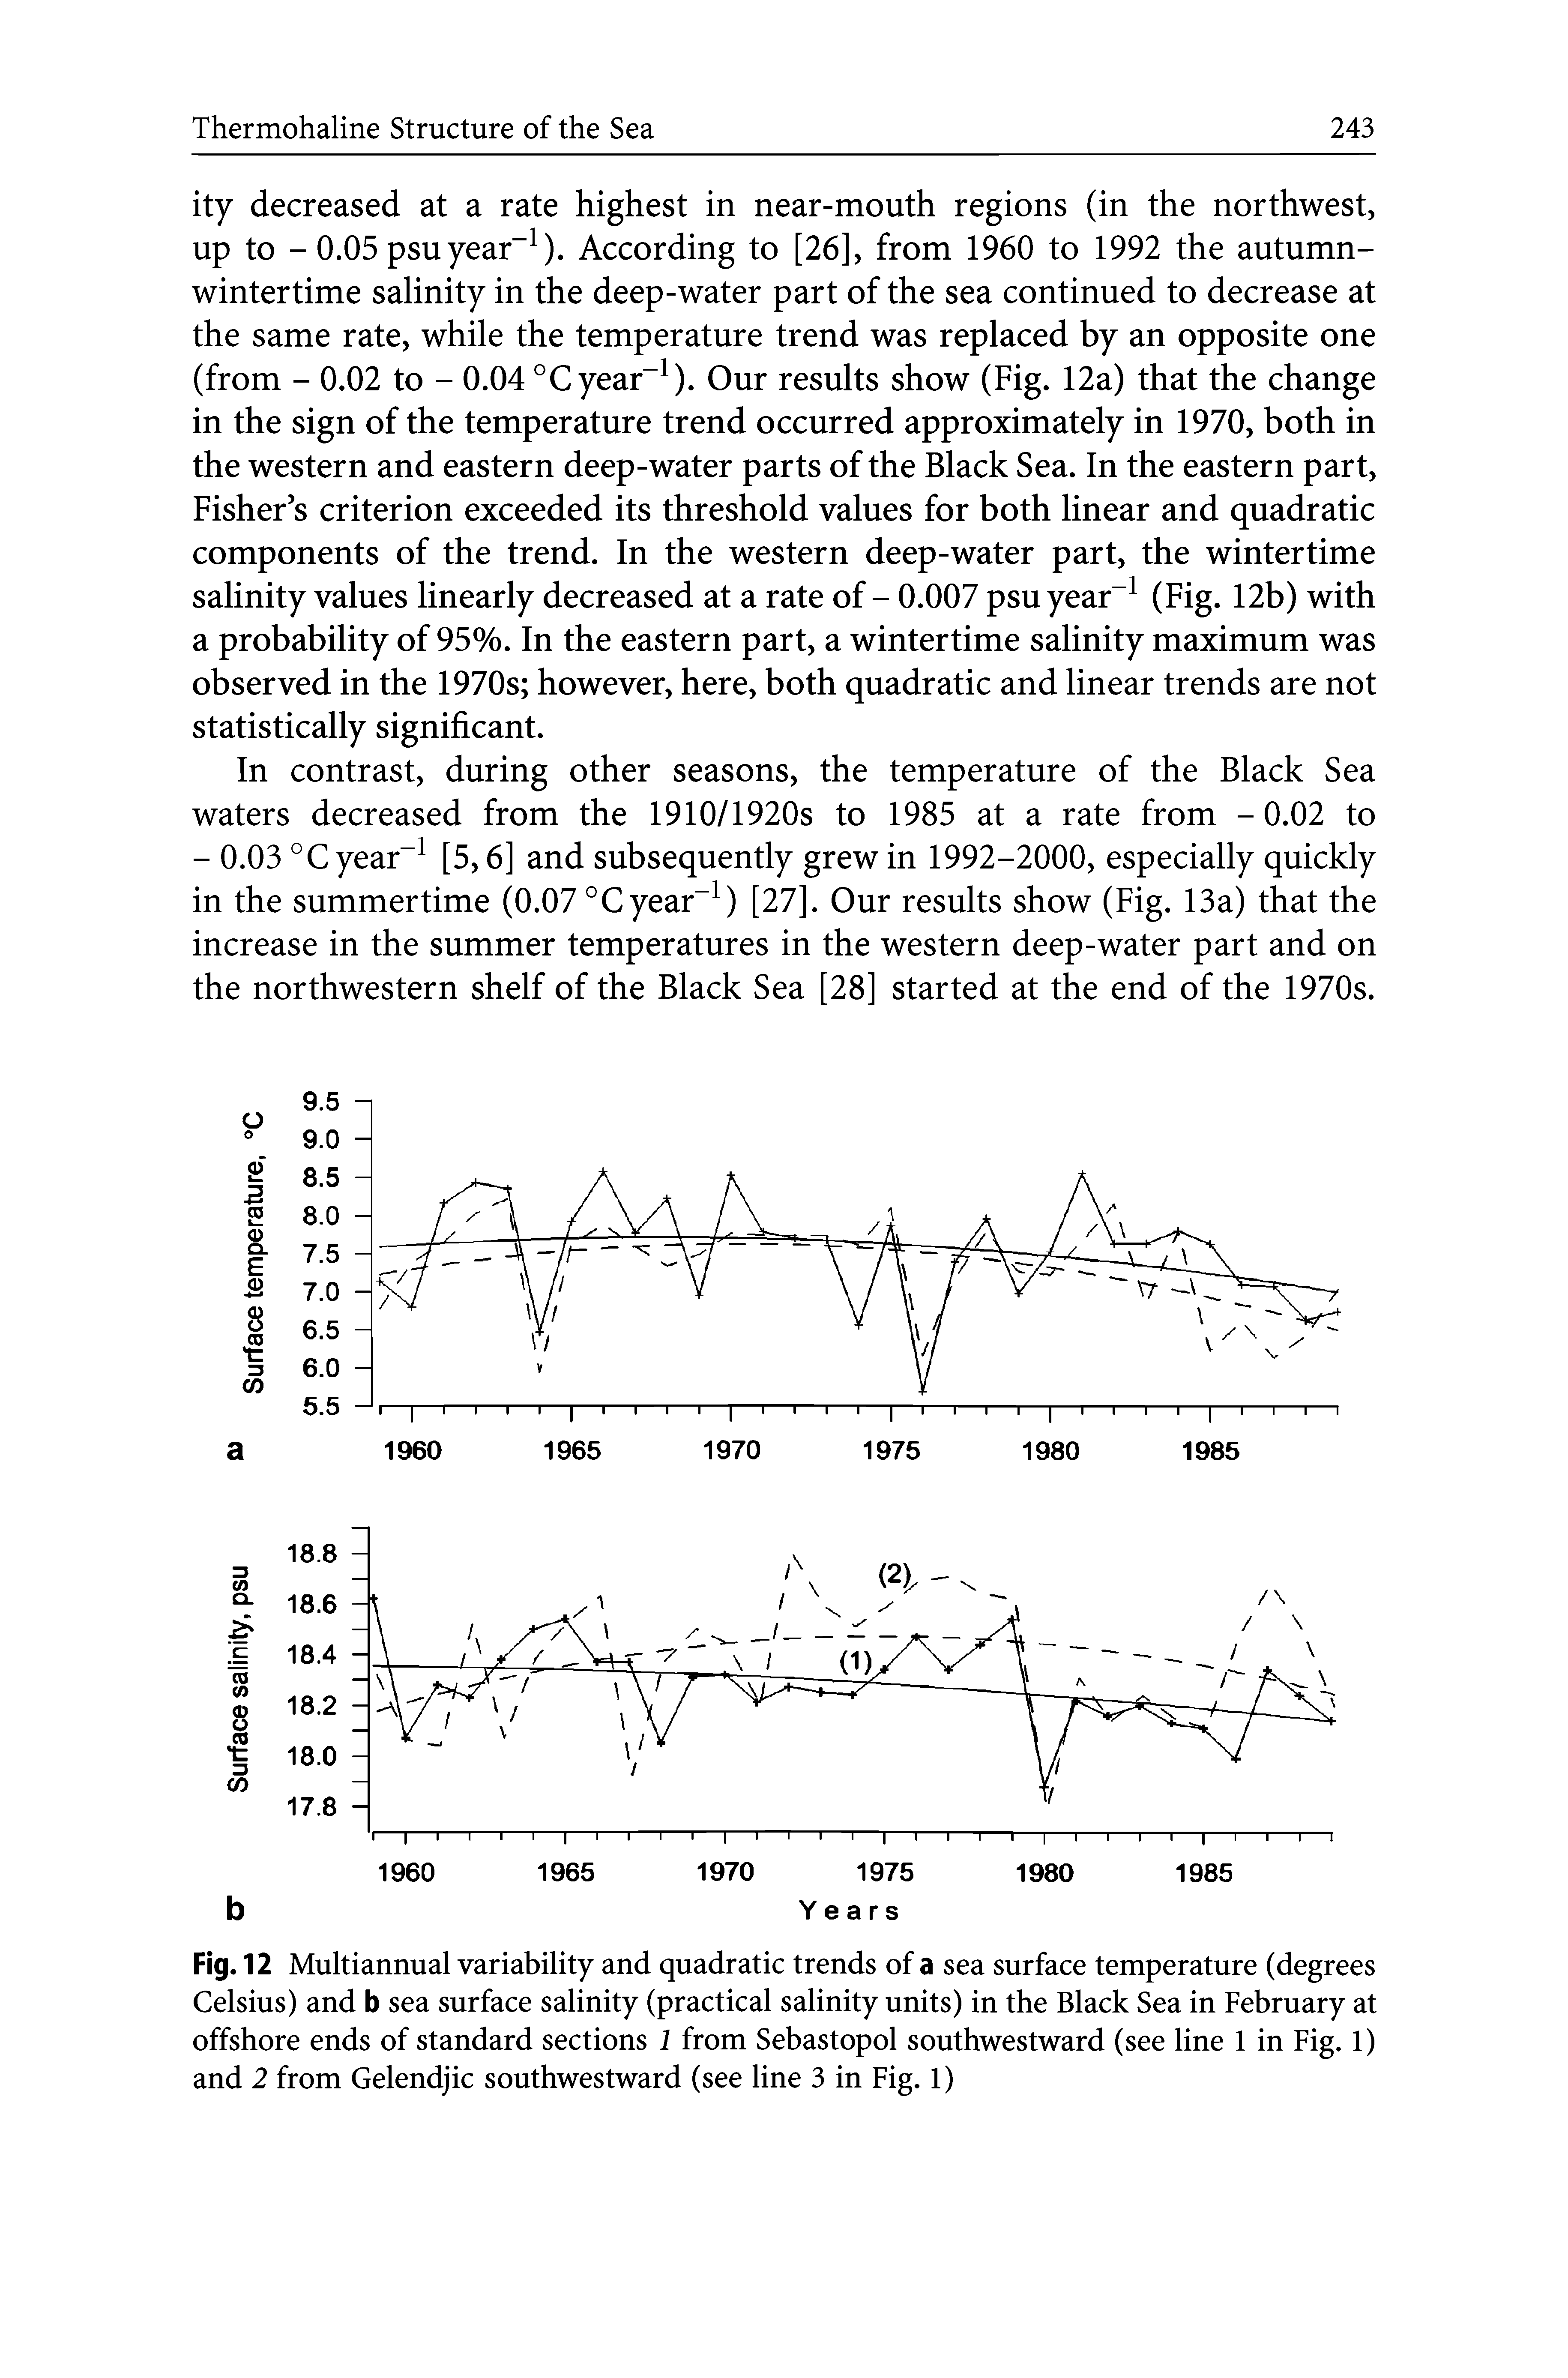 Fig. 12 Multiannual variability and quadratic trends of a sea surface temperature (degrees Celsius) and b sea surface salinity (practical salinity units) in the Black Sea in February at offshore ends of standard sections 1 from Sebastopol southwestward (see line 1 in Fig. 1) and 2 from Gelendjic southwestward (see line 3 in Fig. 1)...